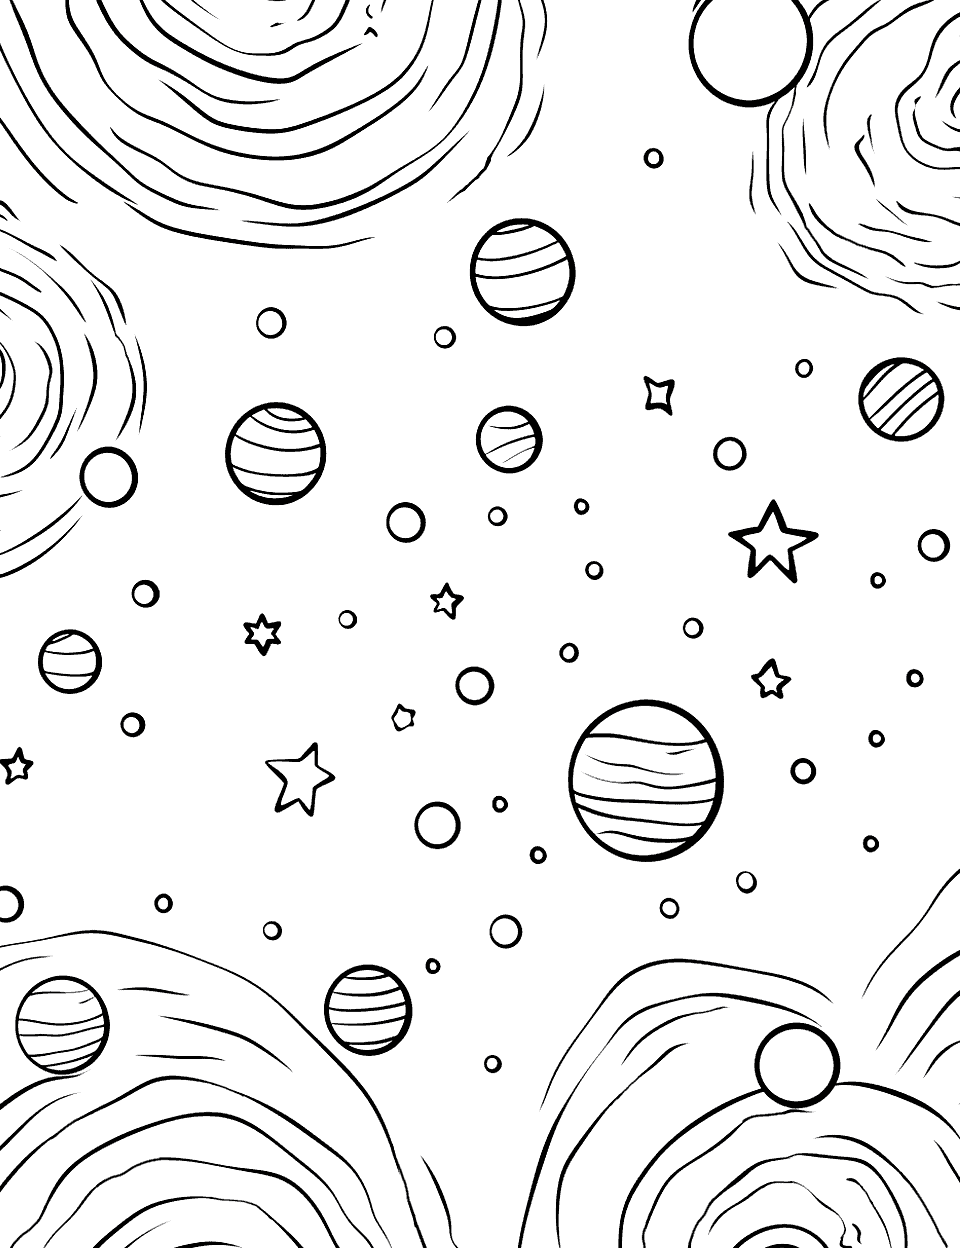 Starry Space Background Solar System Coloring Page - A vast starry space scene with different-sized stars.